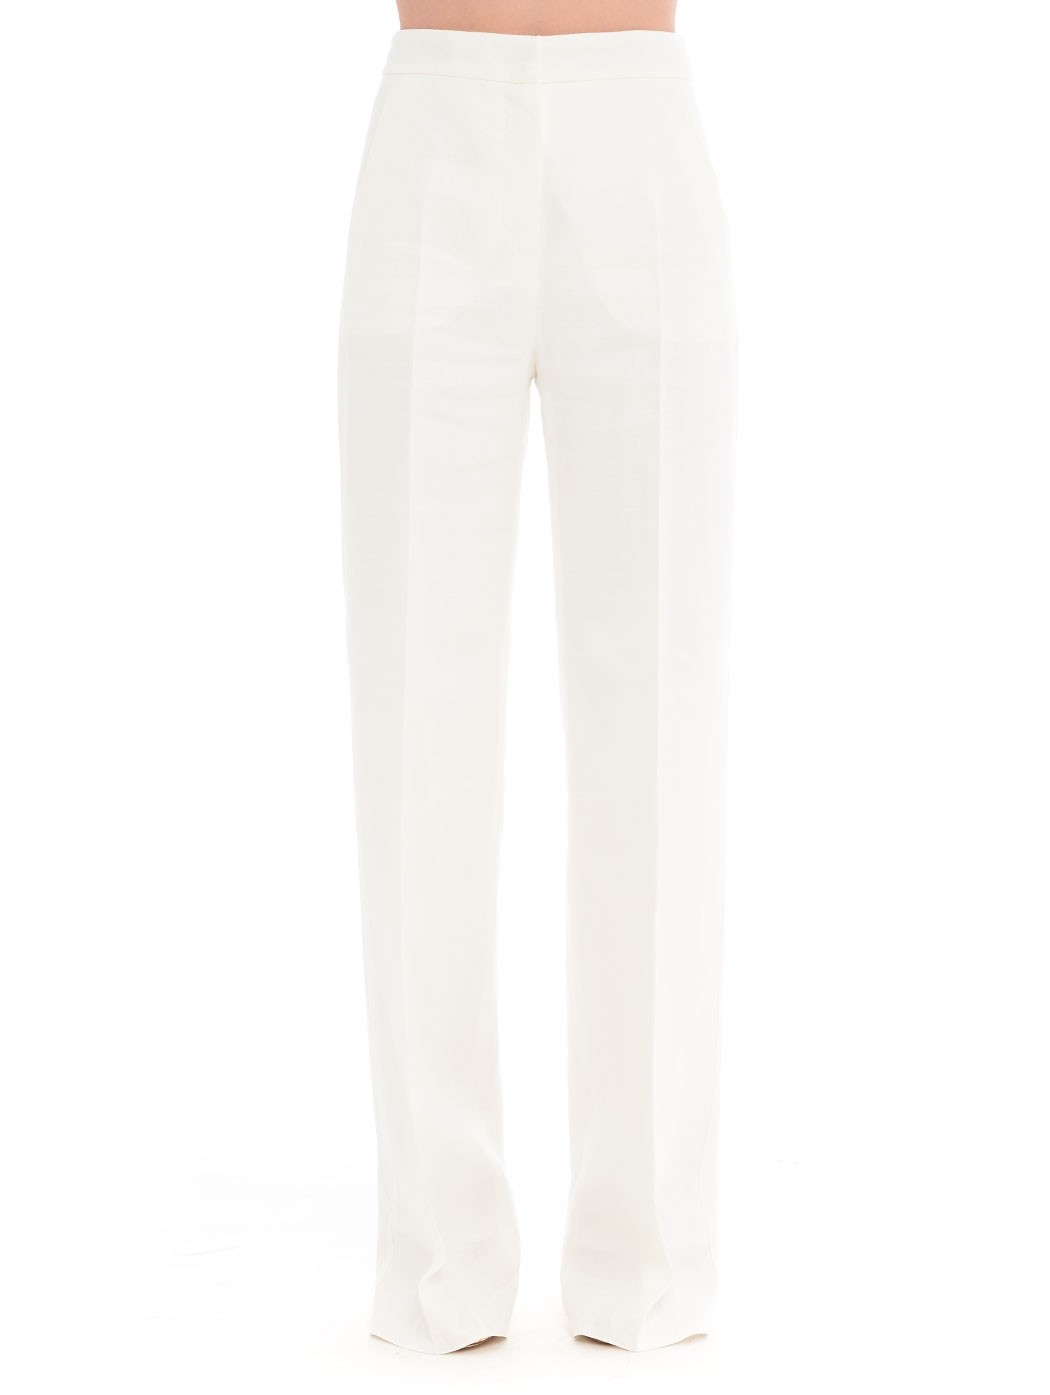  WOMAN TROUSERS,PALAZZO TROUSERS,SKINNY TROUSERS,MARNI TROUSERS,FORTE FORTE TROUSERS,8PM TROUSERS,MSGM TROUSERS,CROP PANTS  MAX MARA BRUSSON